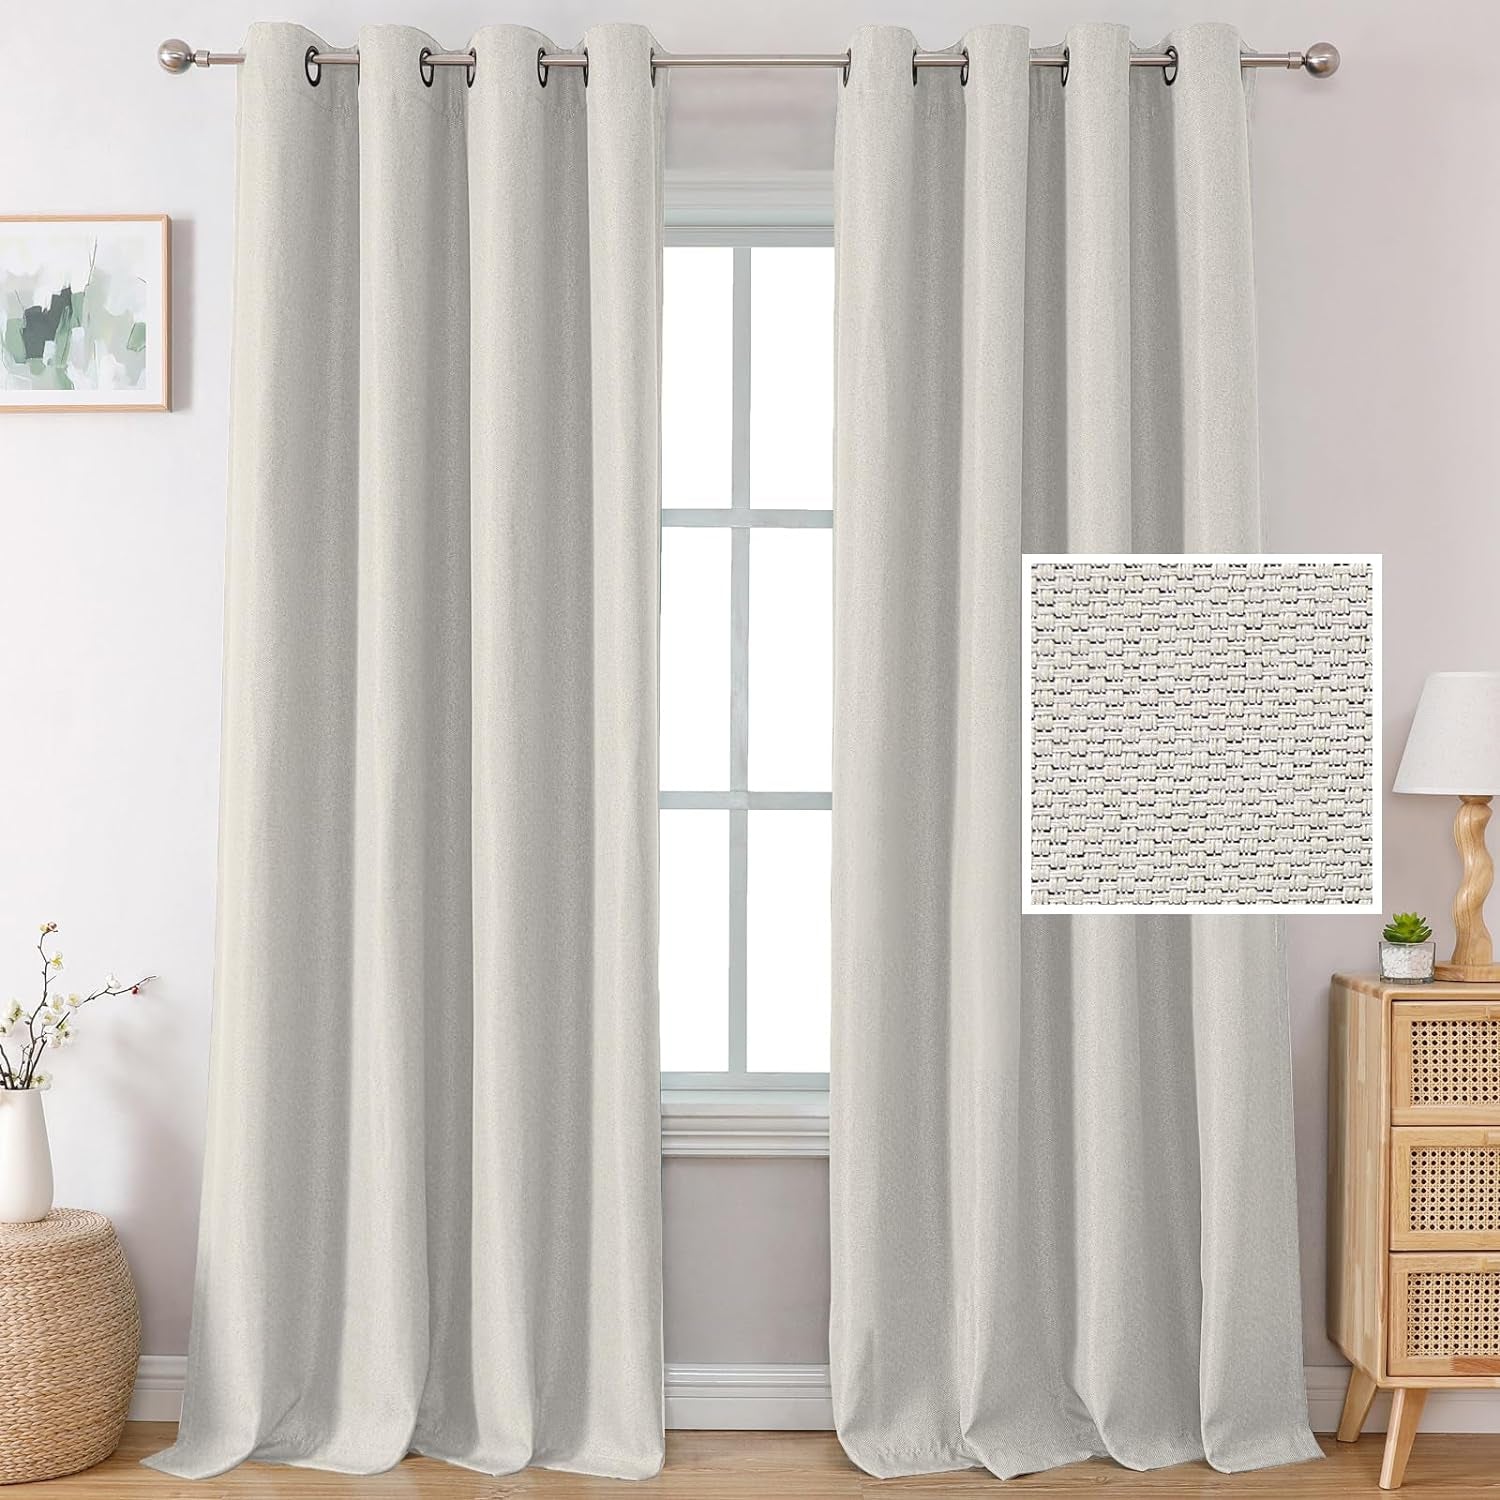 H.VERSAILTEX Linen Blackout Curtains 84 Inches Long Thermal Insulated Room Darkening Linen Curtains for Bedroom Textured Burlap Grommet Window Curtains for Living Room, Bluestone and Taupe, 2 Panels  H.VERSAILTEX Off White 52"W X 96"L 